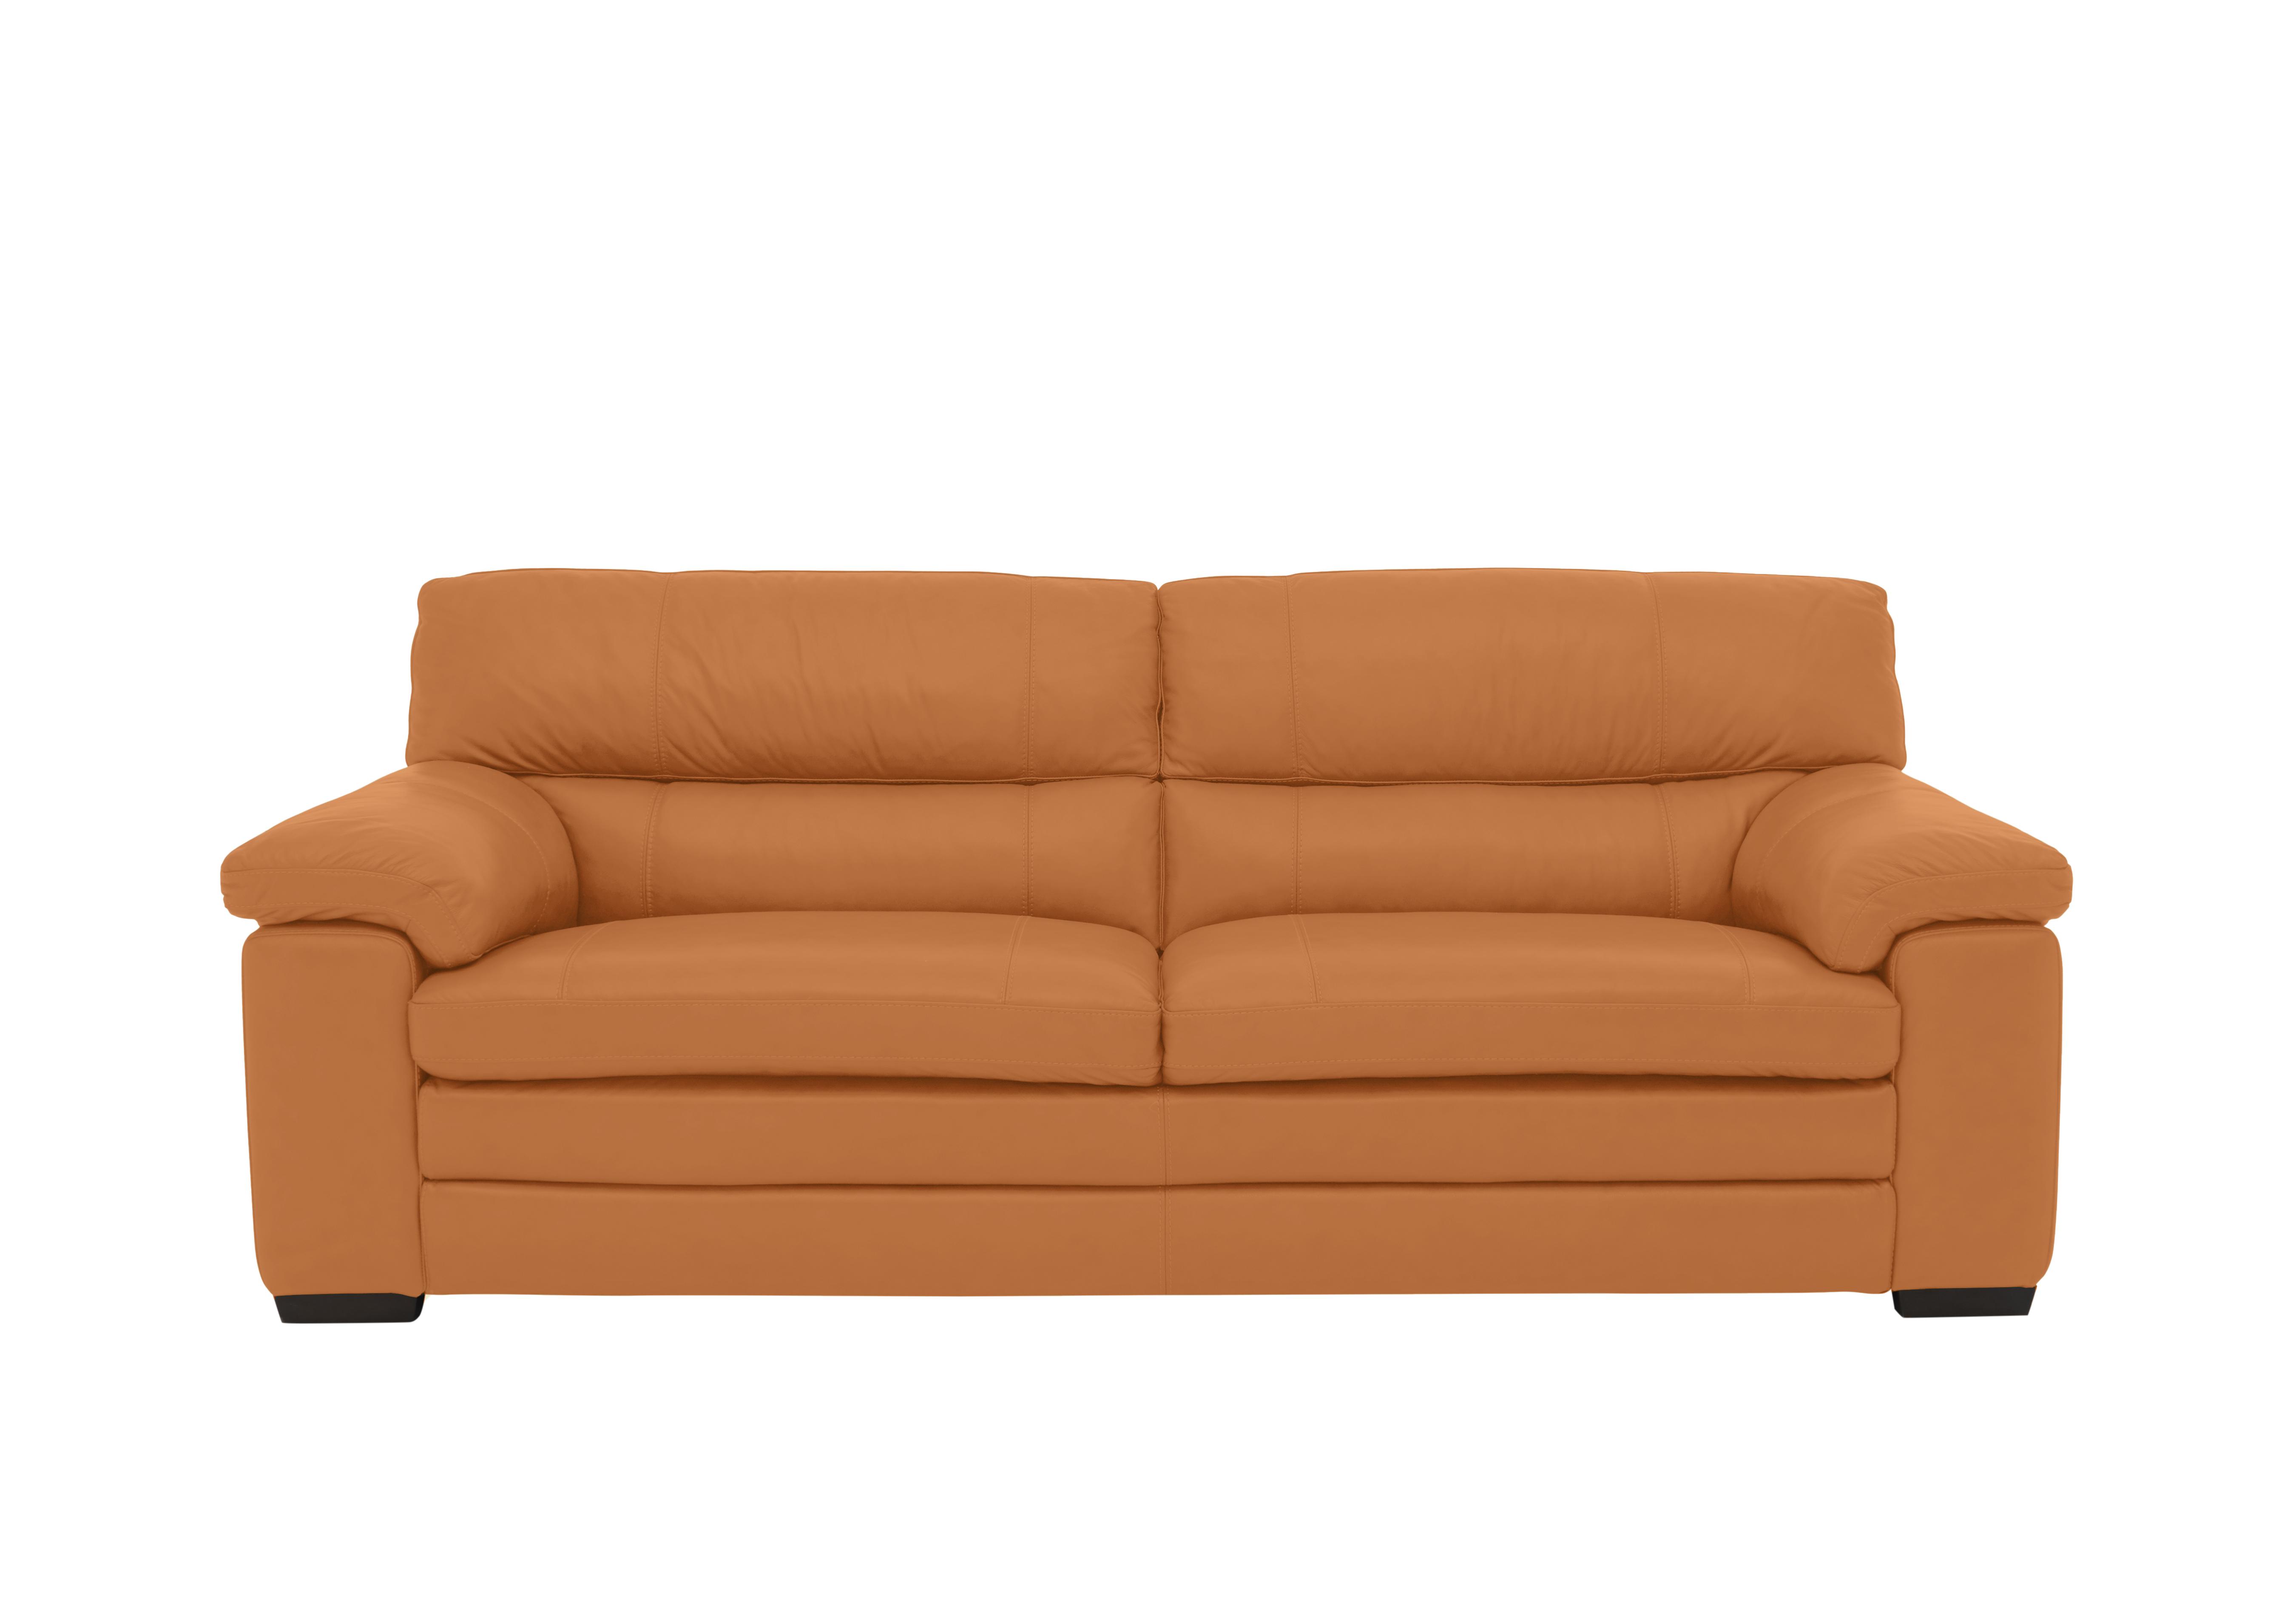 Cozee 3 Seater Pure Premium Leather Sofa in Bv-335e Honey Yellow on Furniture Village